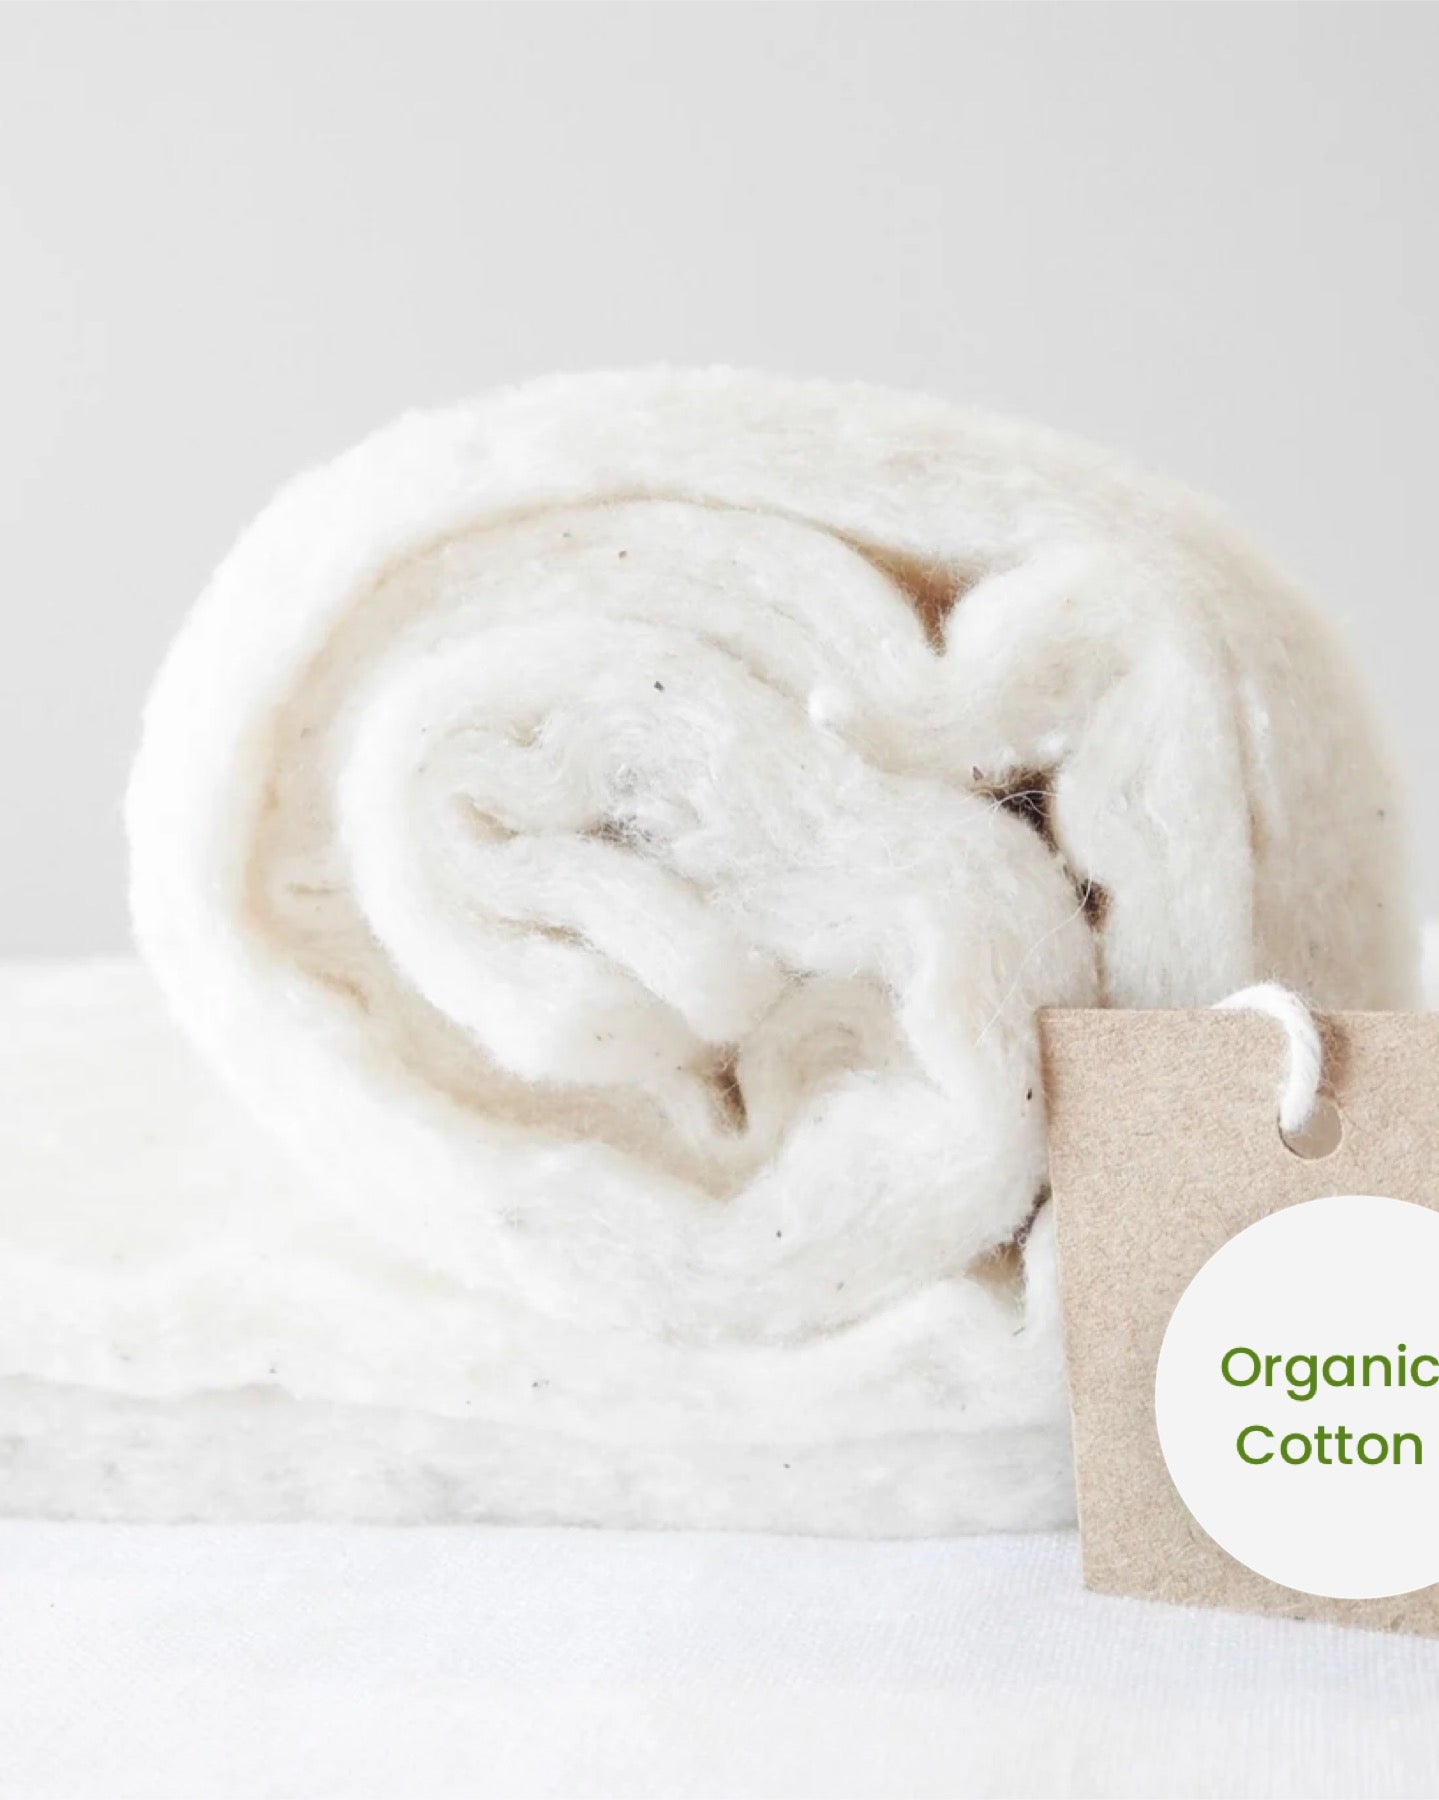 Organic cotton for filling